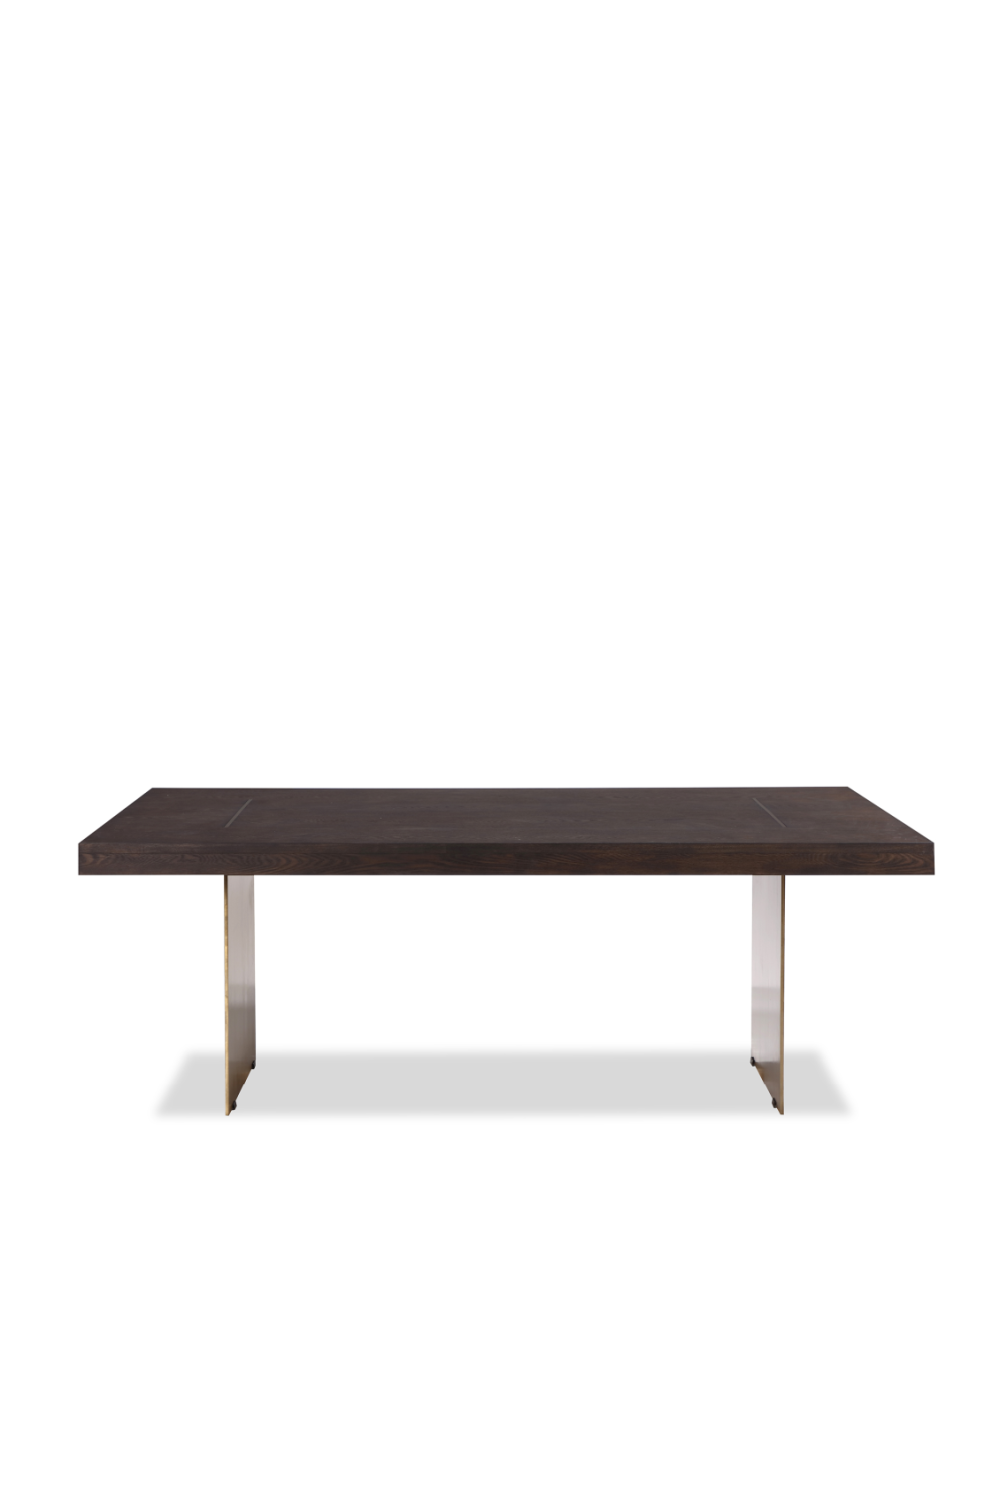 Ash Brass Dining Table | Liang & Eimil Unma | Oroa.com